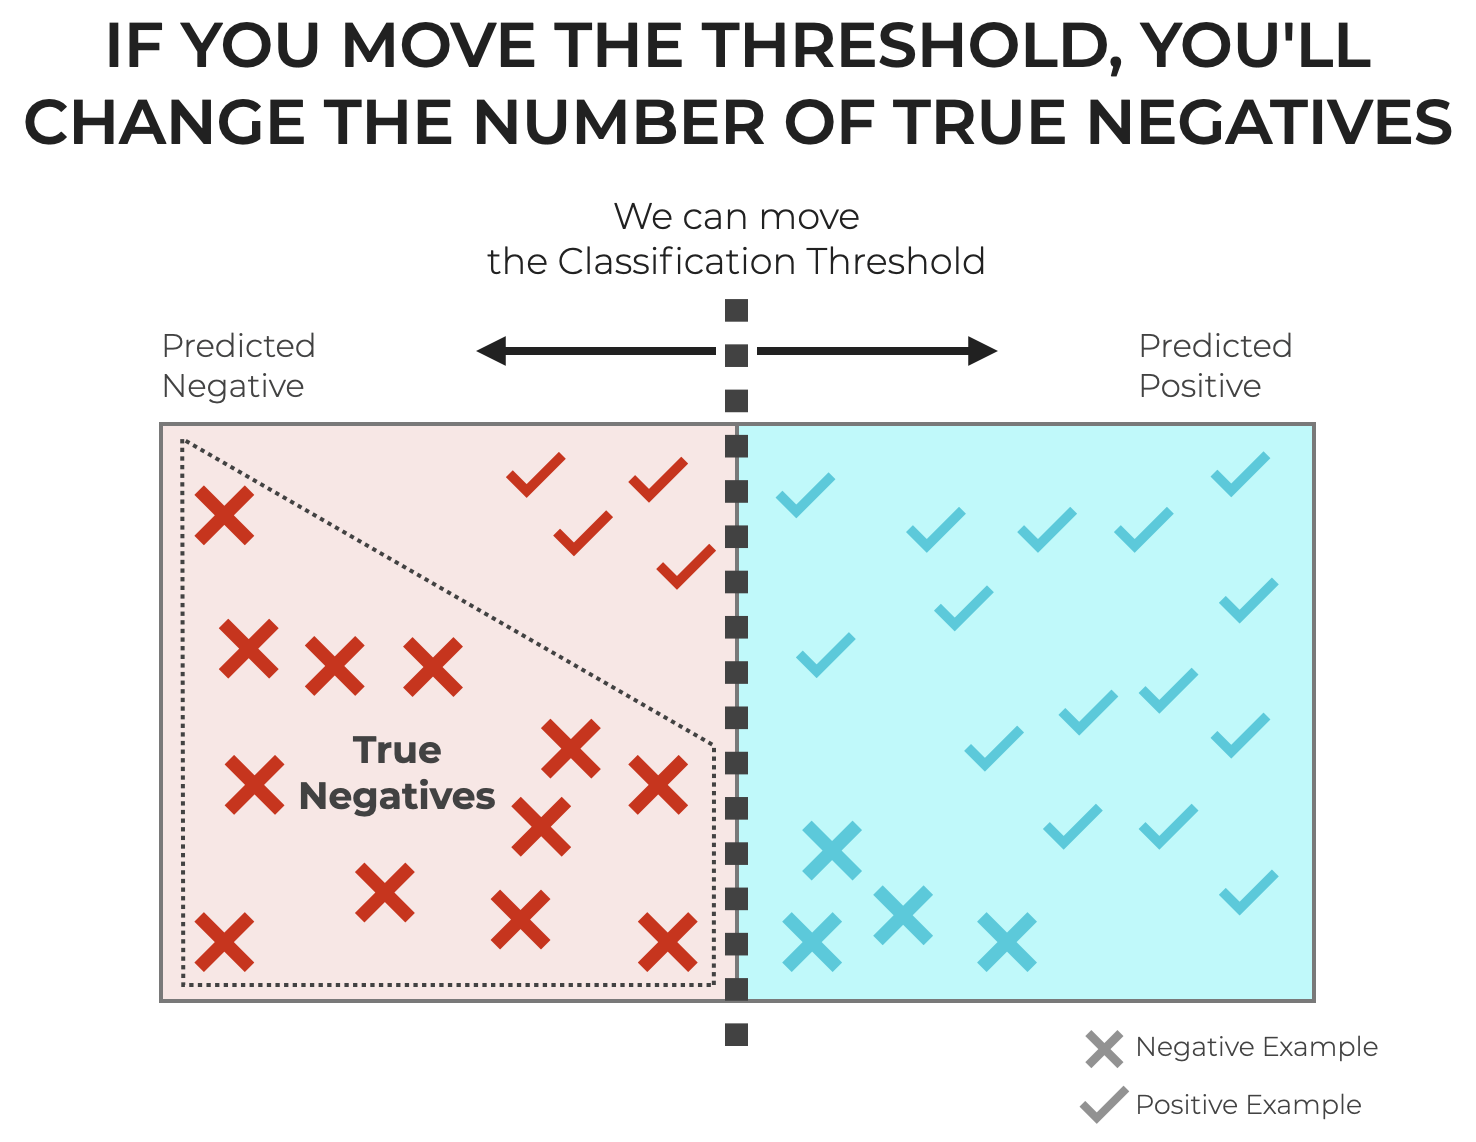 An image that shows how True Negatives depend on the classification threshold of a classifier.